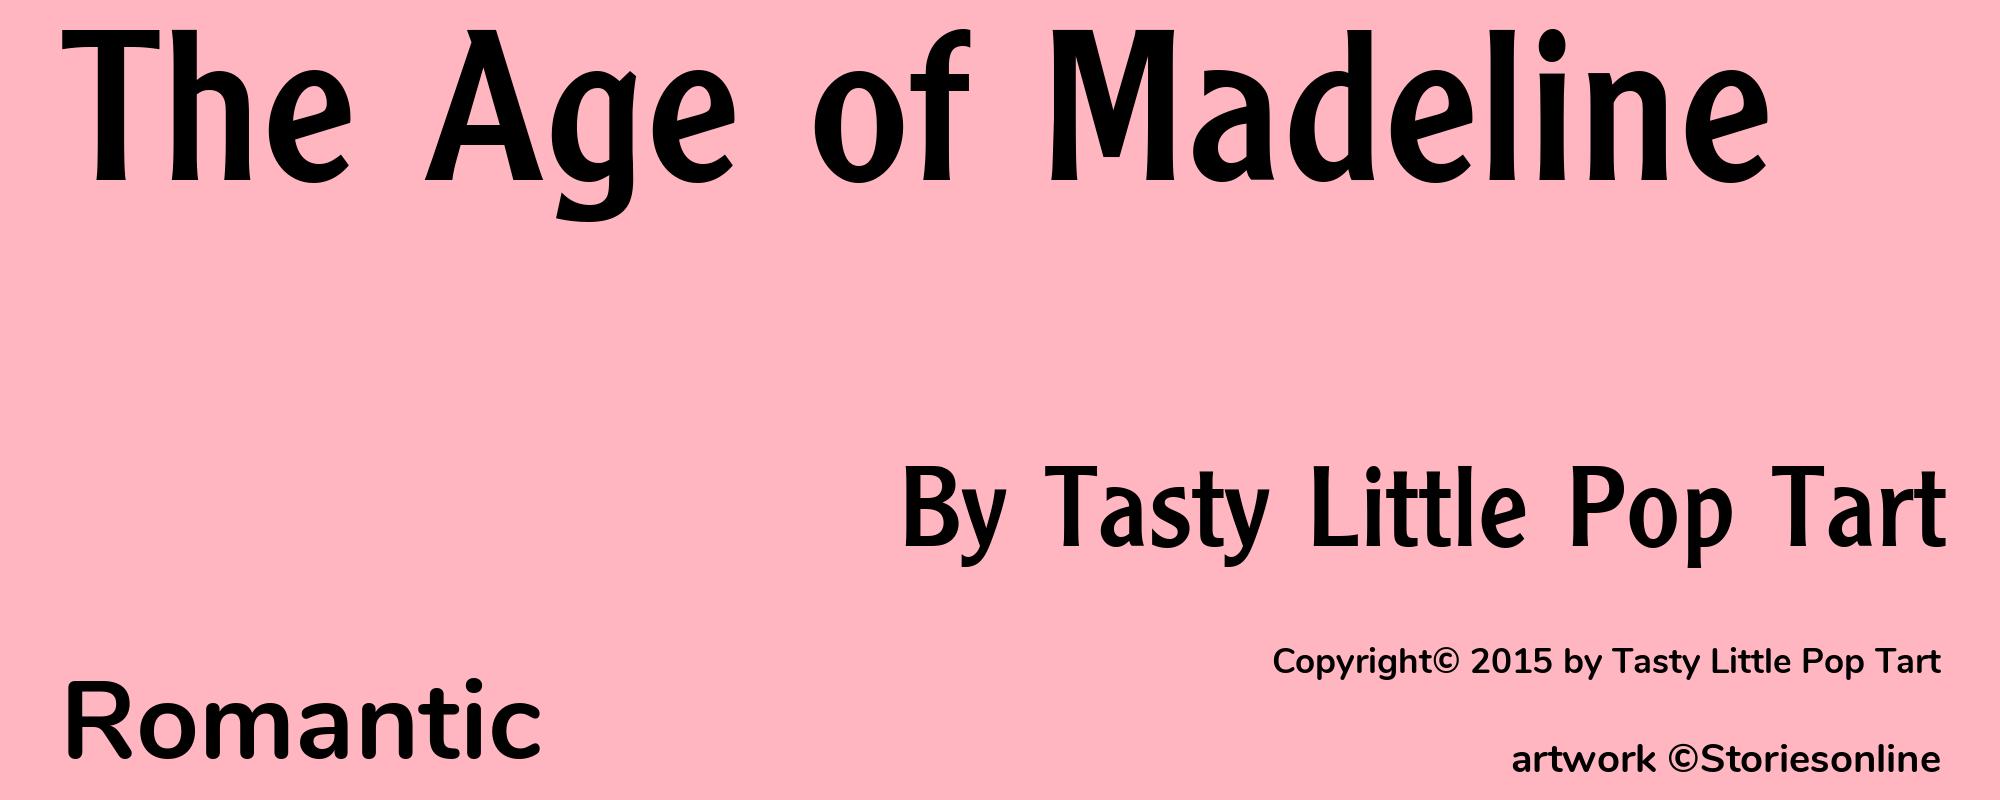 The Age of Madeline - Cover